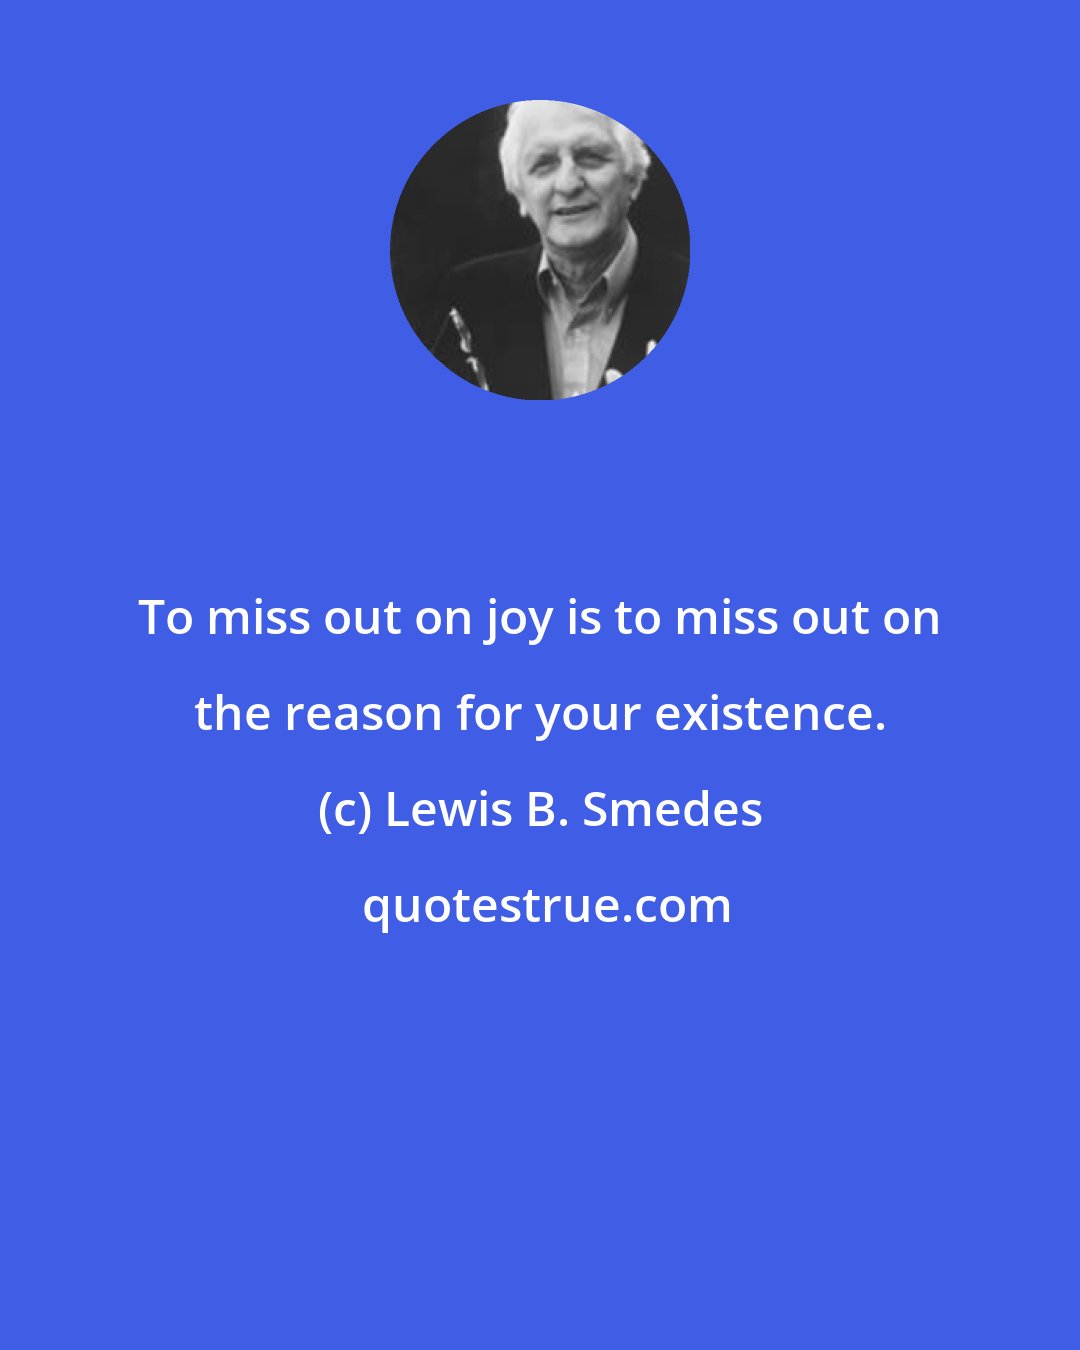 Lewis B. Smedes: To miss out on joy is to miss out on the reason for your existence.